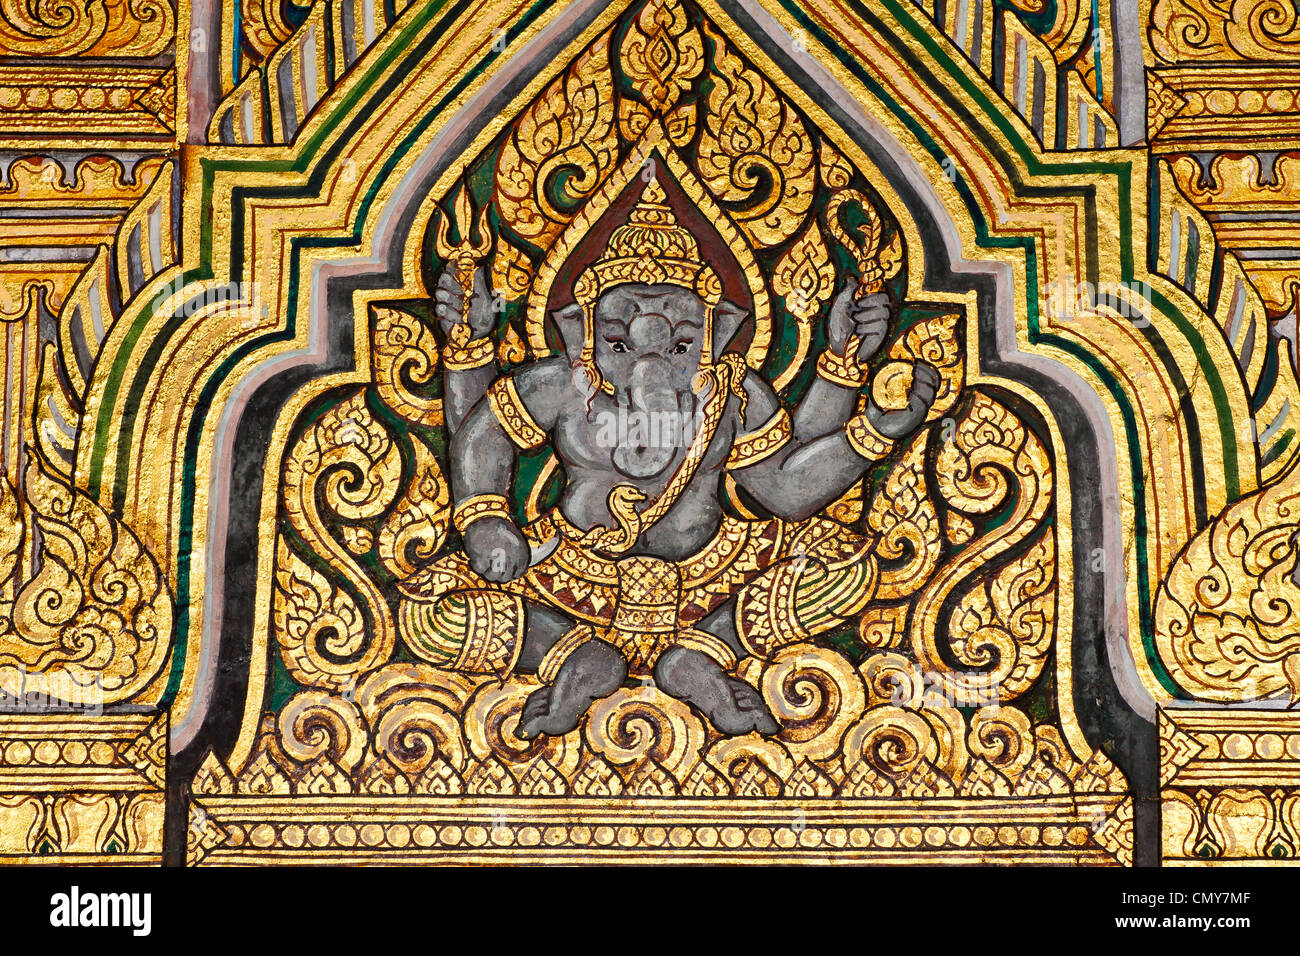 Ganesh, The Indian God, Vintage traditional Thai style art painting on temple. Stock Photo